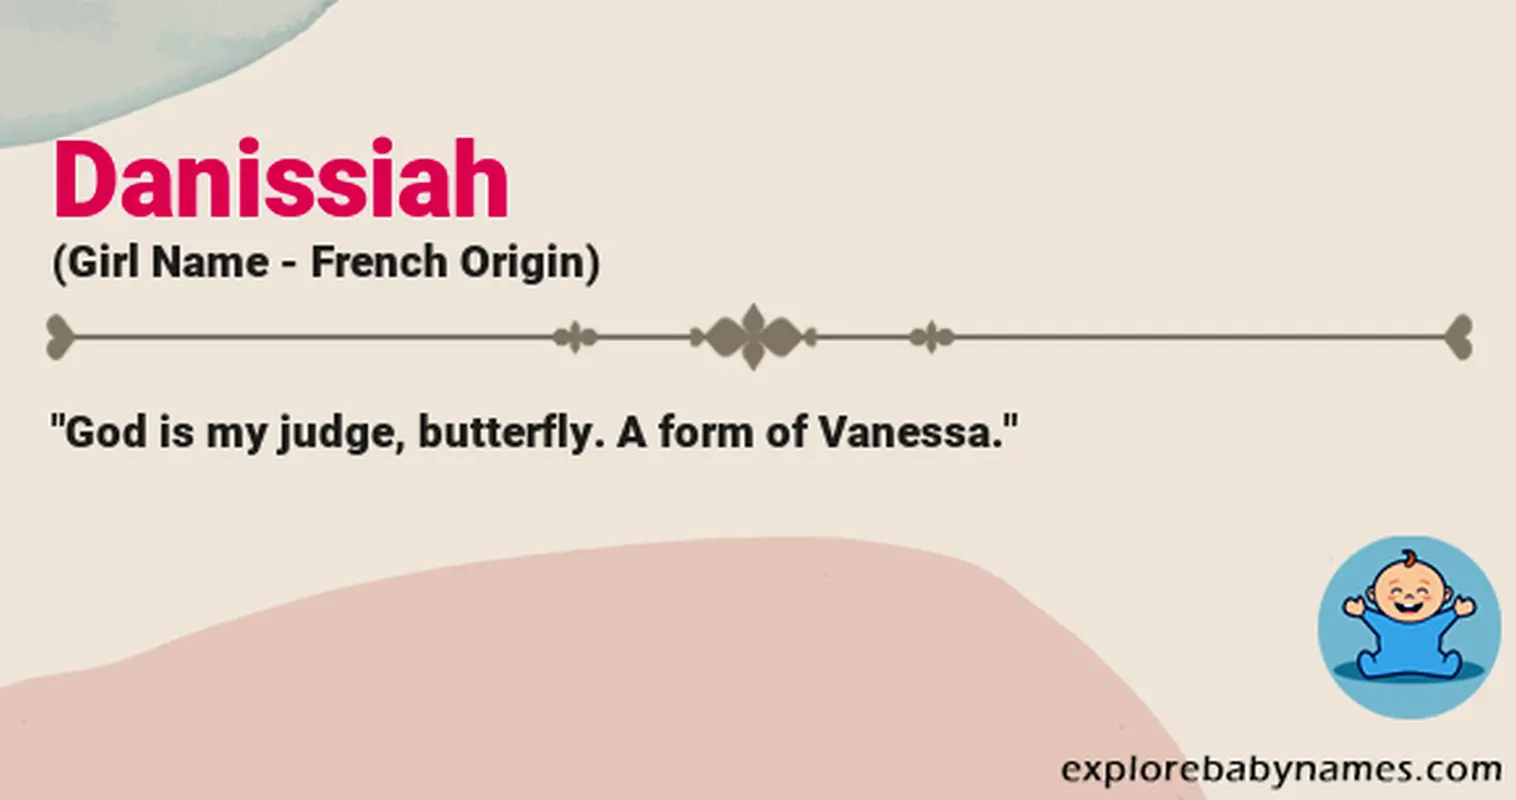 Meaning of Danissiah